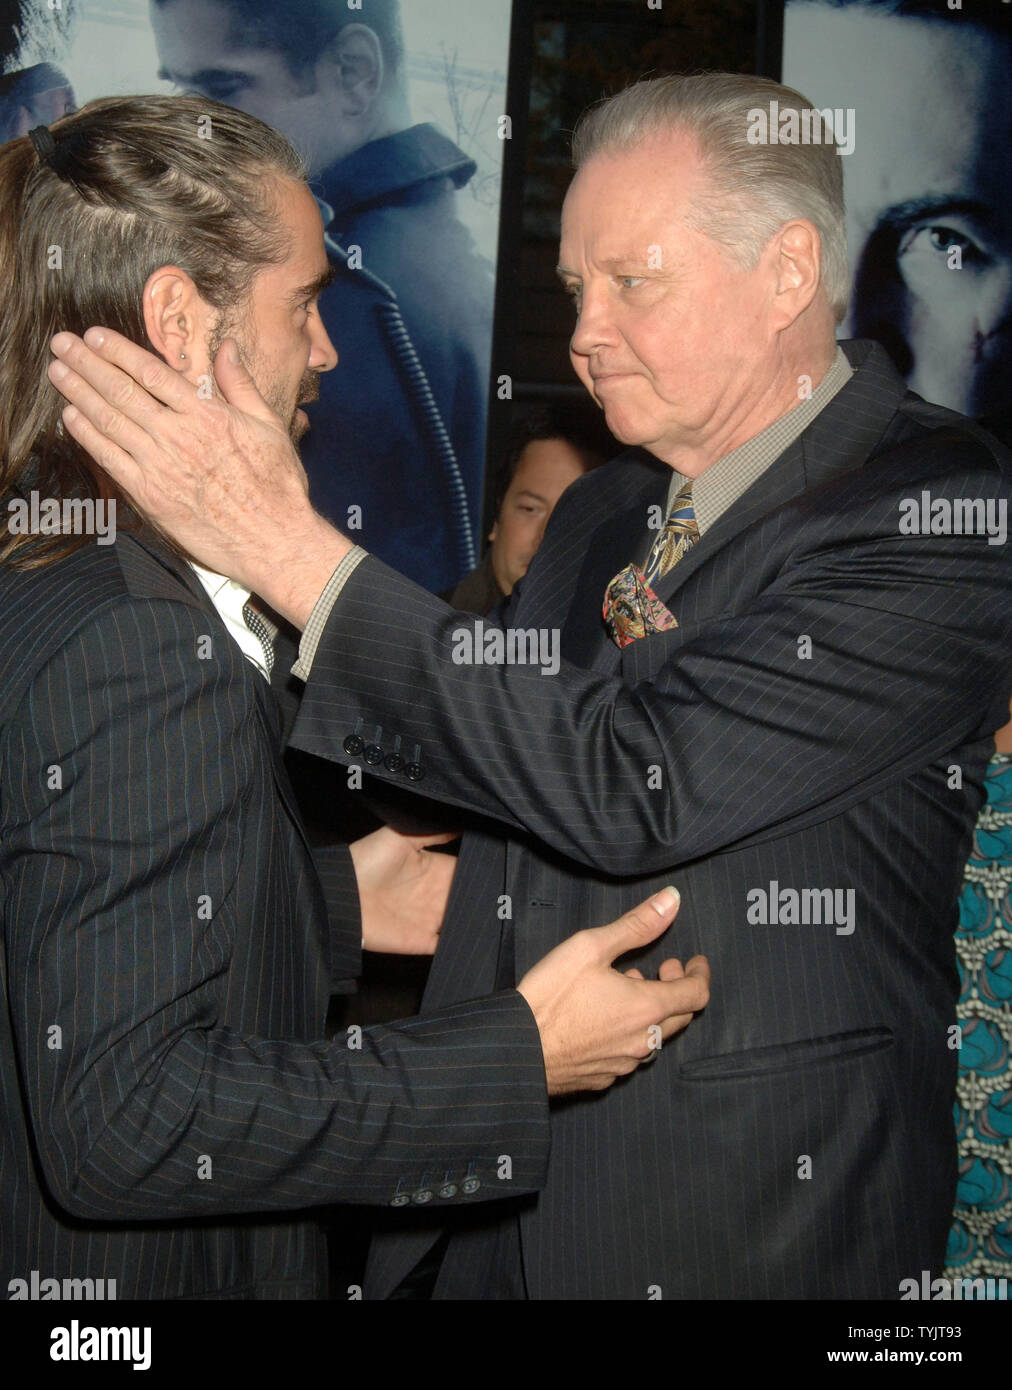 Actors Colin Farrell and Jon Voight (R) attend the New York premiere of their film 'Pride and Glory' on October 15, 2008.   (UPI Photo/Ezio Petersen) Stock Photo